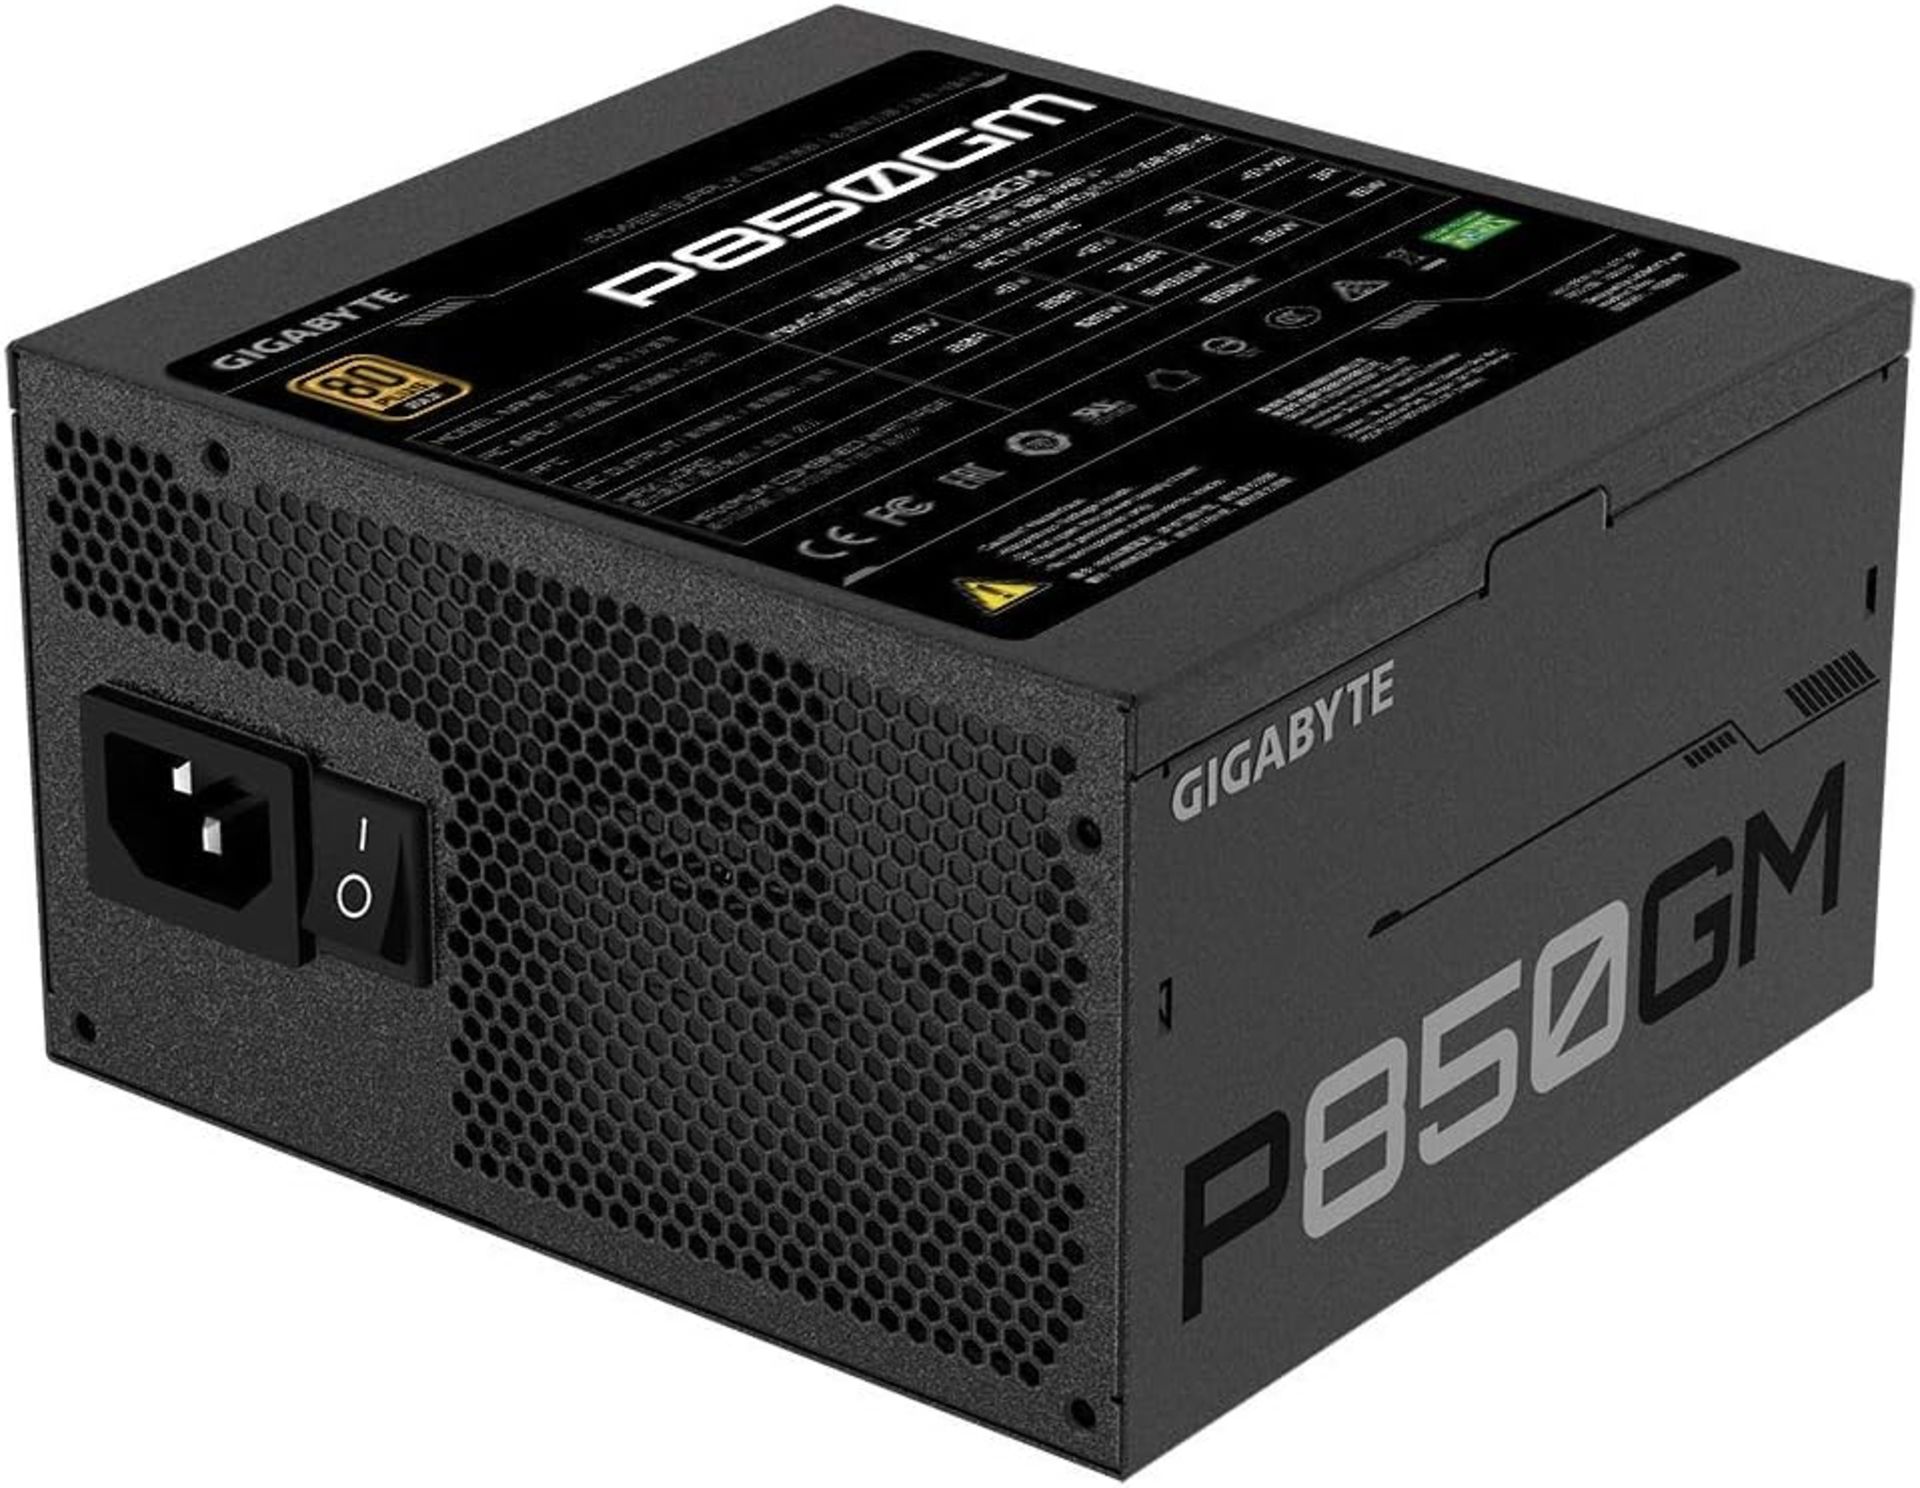 BRAND NEW FACTORY SEALED GIGABYTE P850GM V2 80 Plus Gold Certified PSU. RRP £99.99. FULLY MODULAR - Image 3 of 7